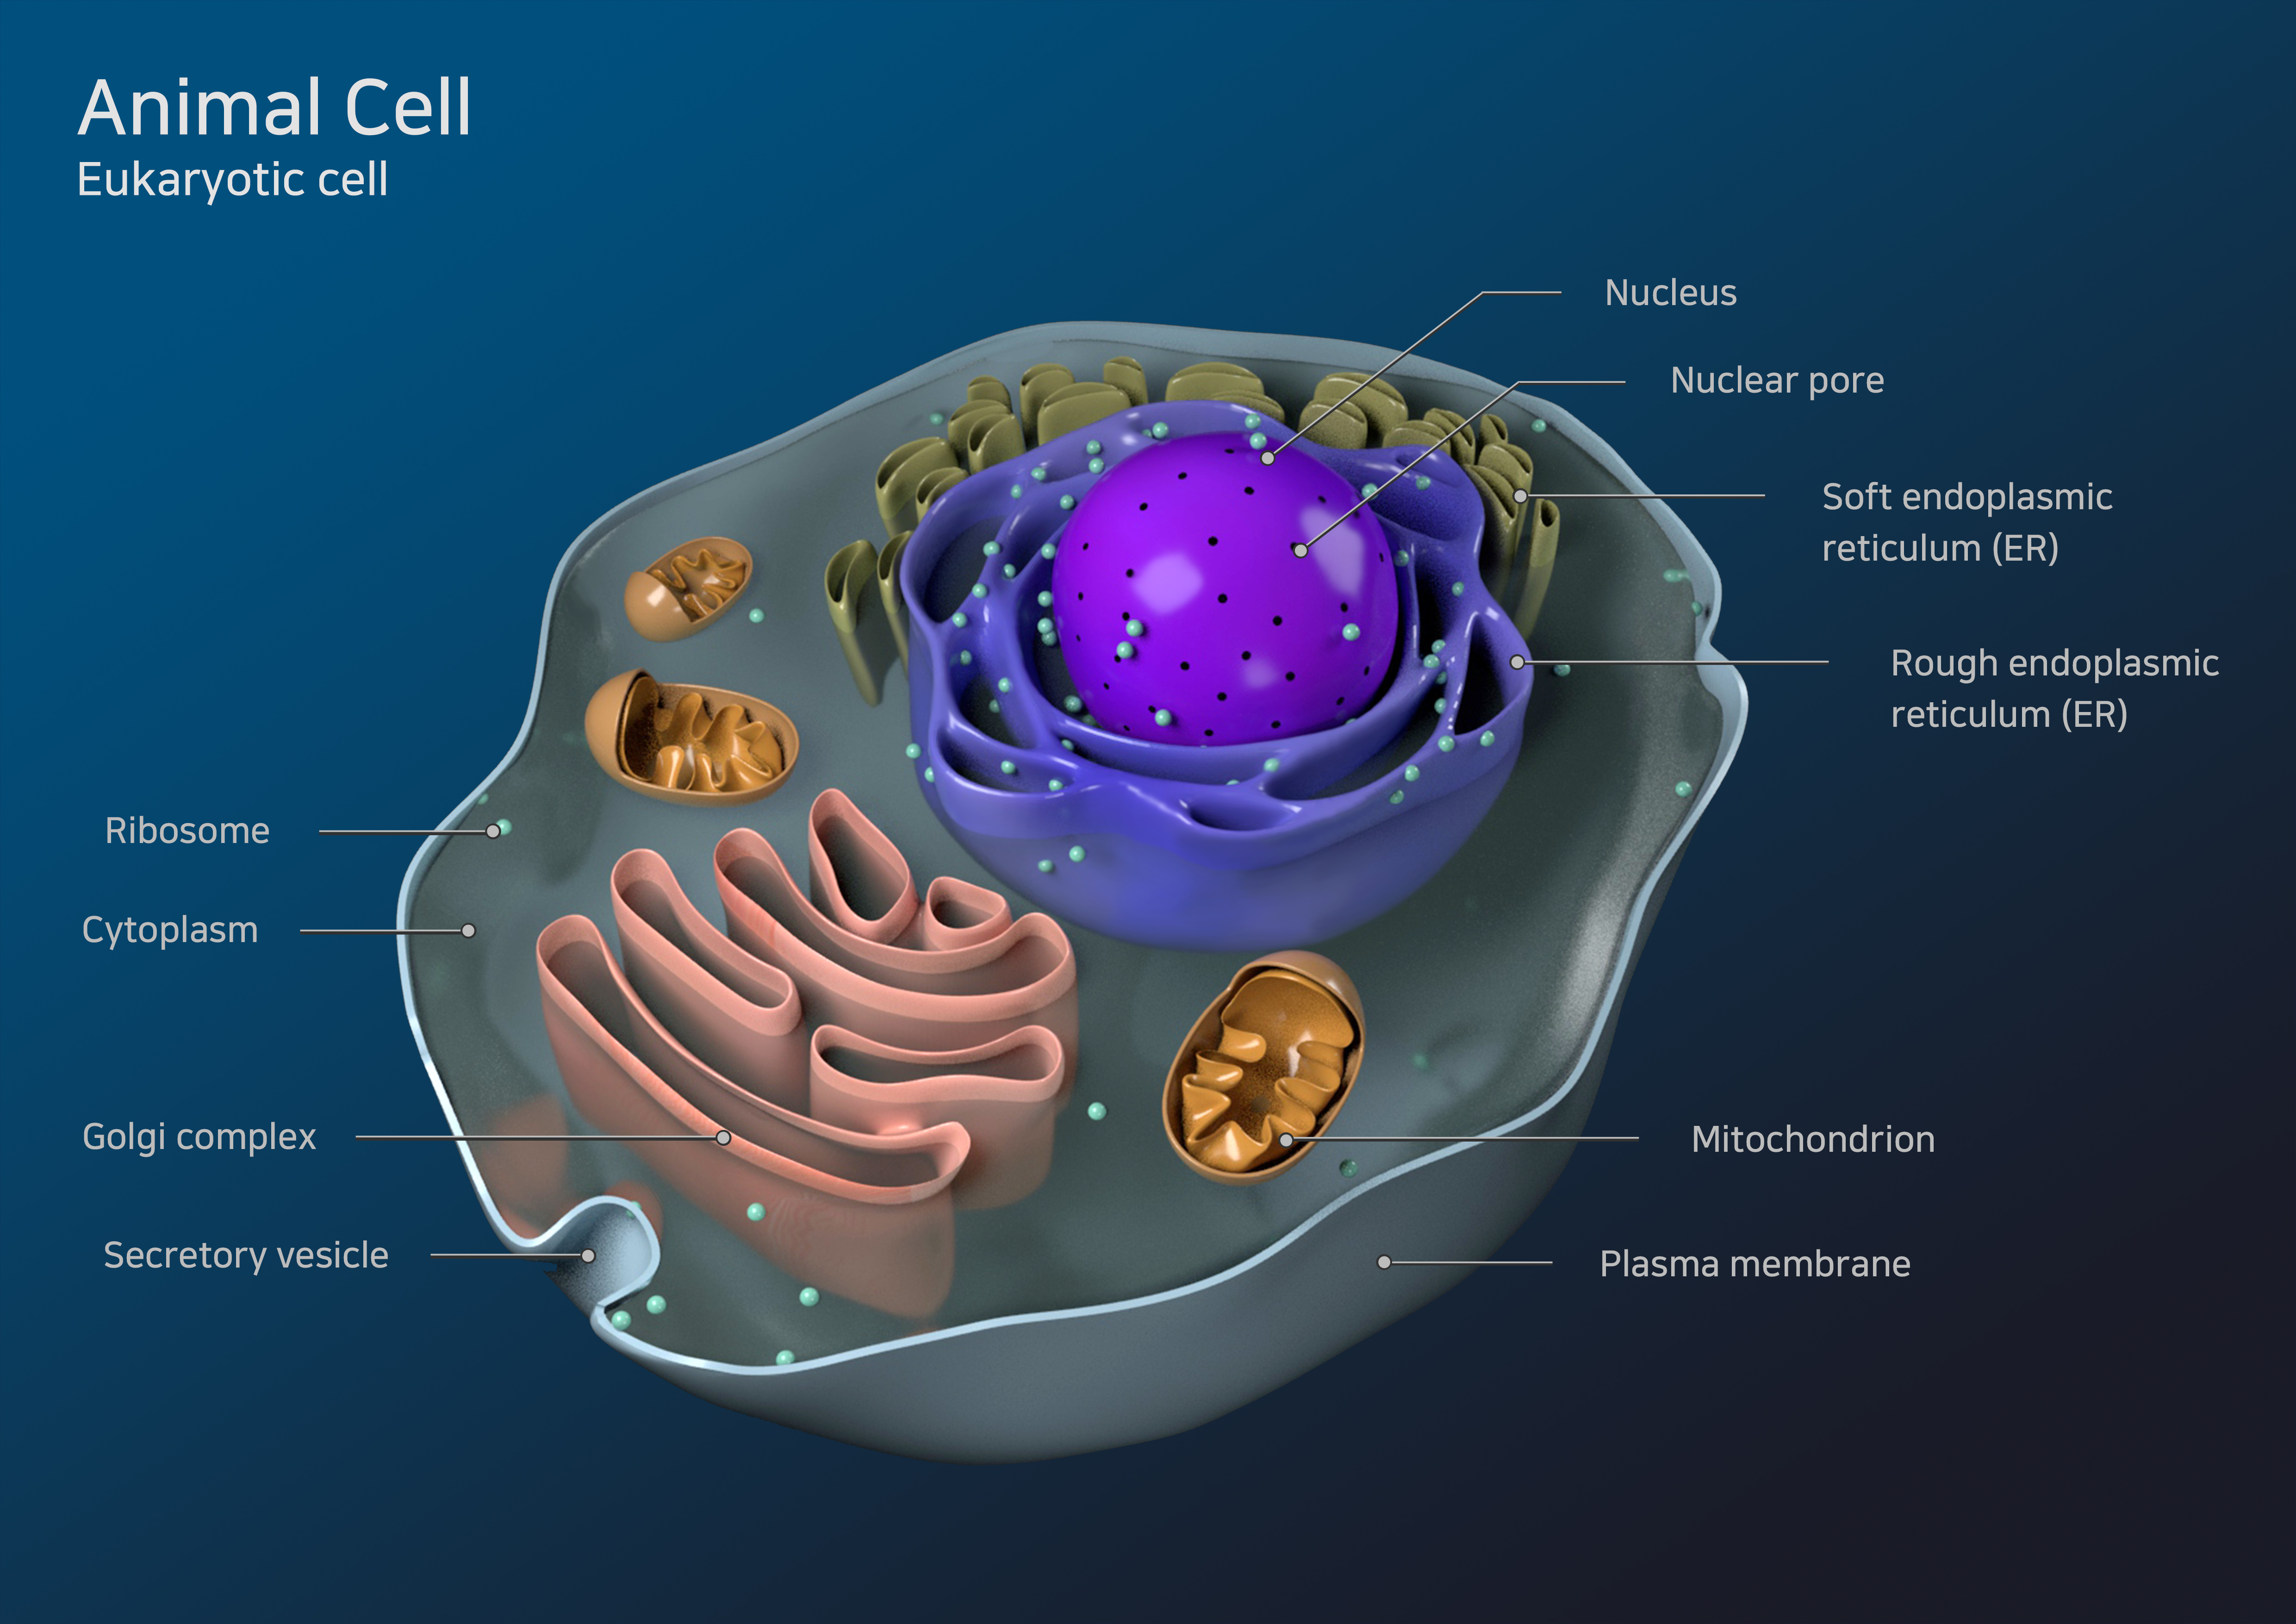 3D] Animal cell